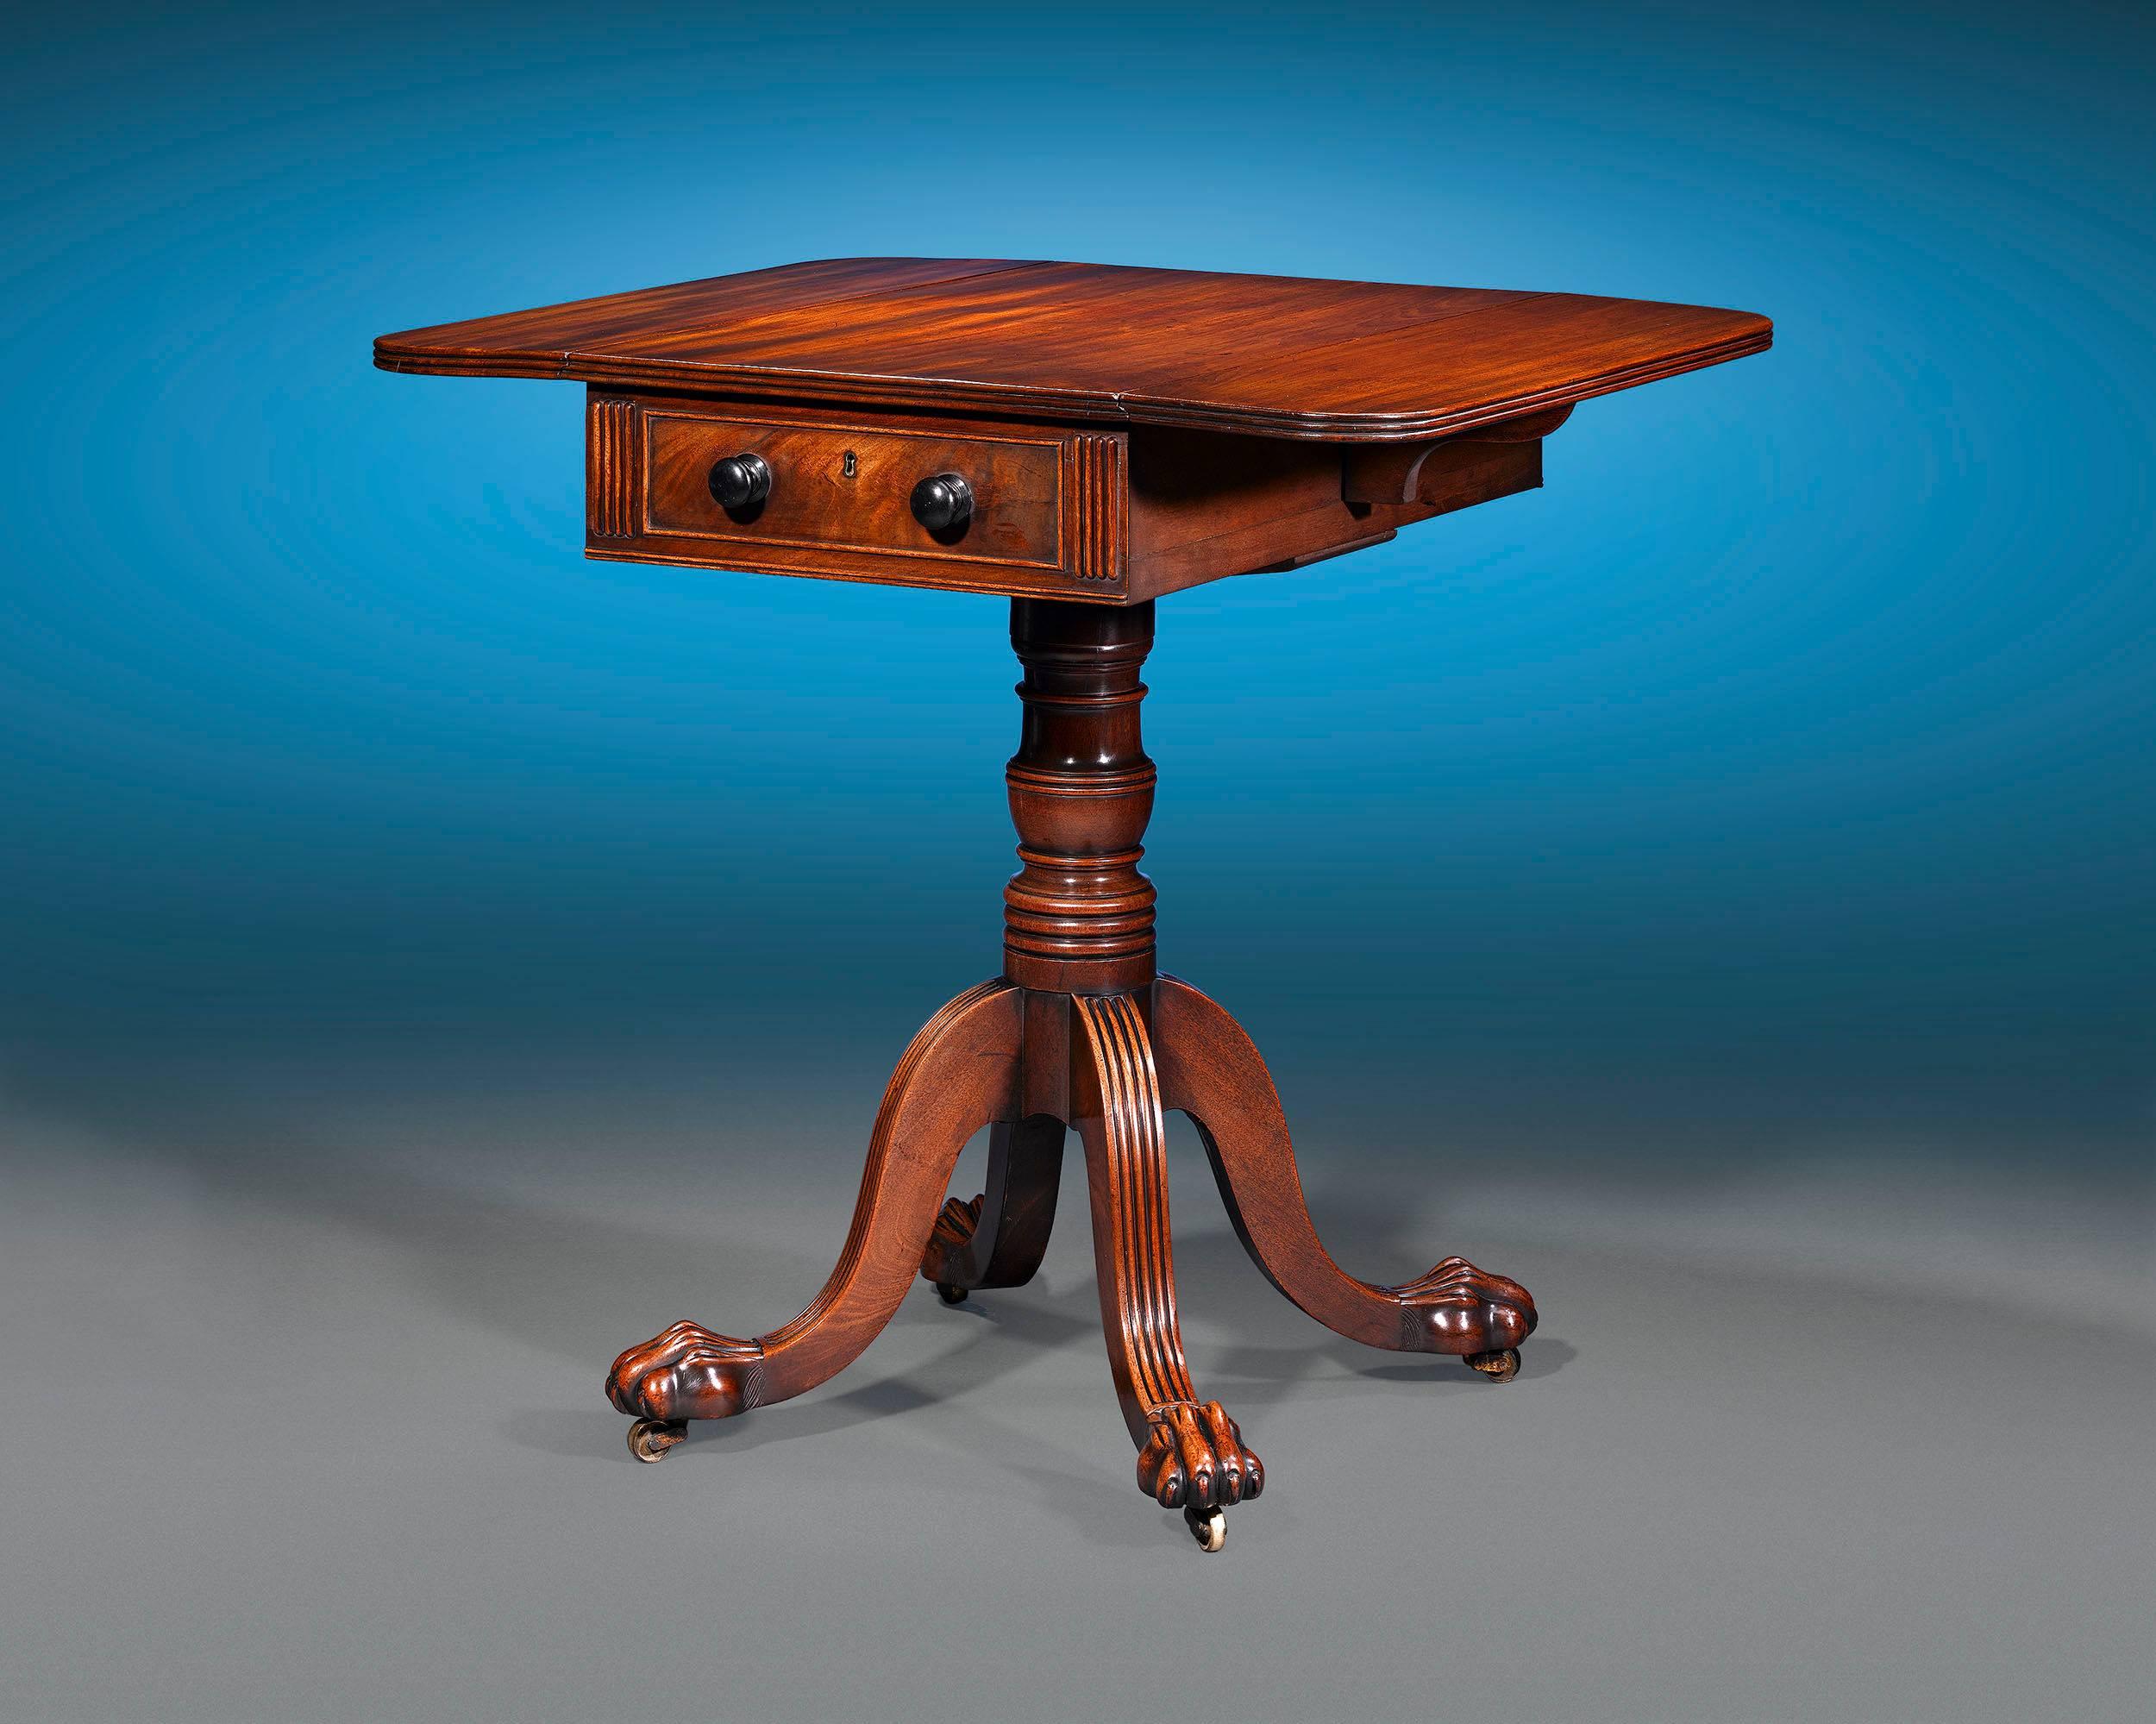 Boasting wonderfully grained and patinated mahogany of the highest caliber, this early Regency-period Pembroke table is attributed to the Gillows firm of Lancaster, England. From the quality of the mahogany and perfect proportionality, to the